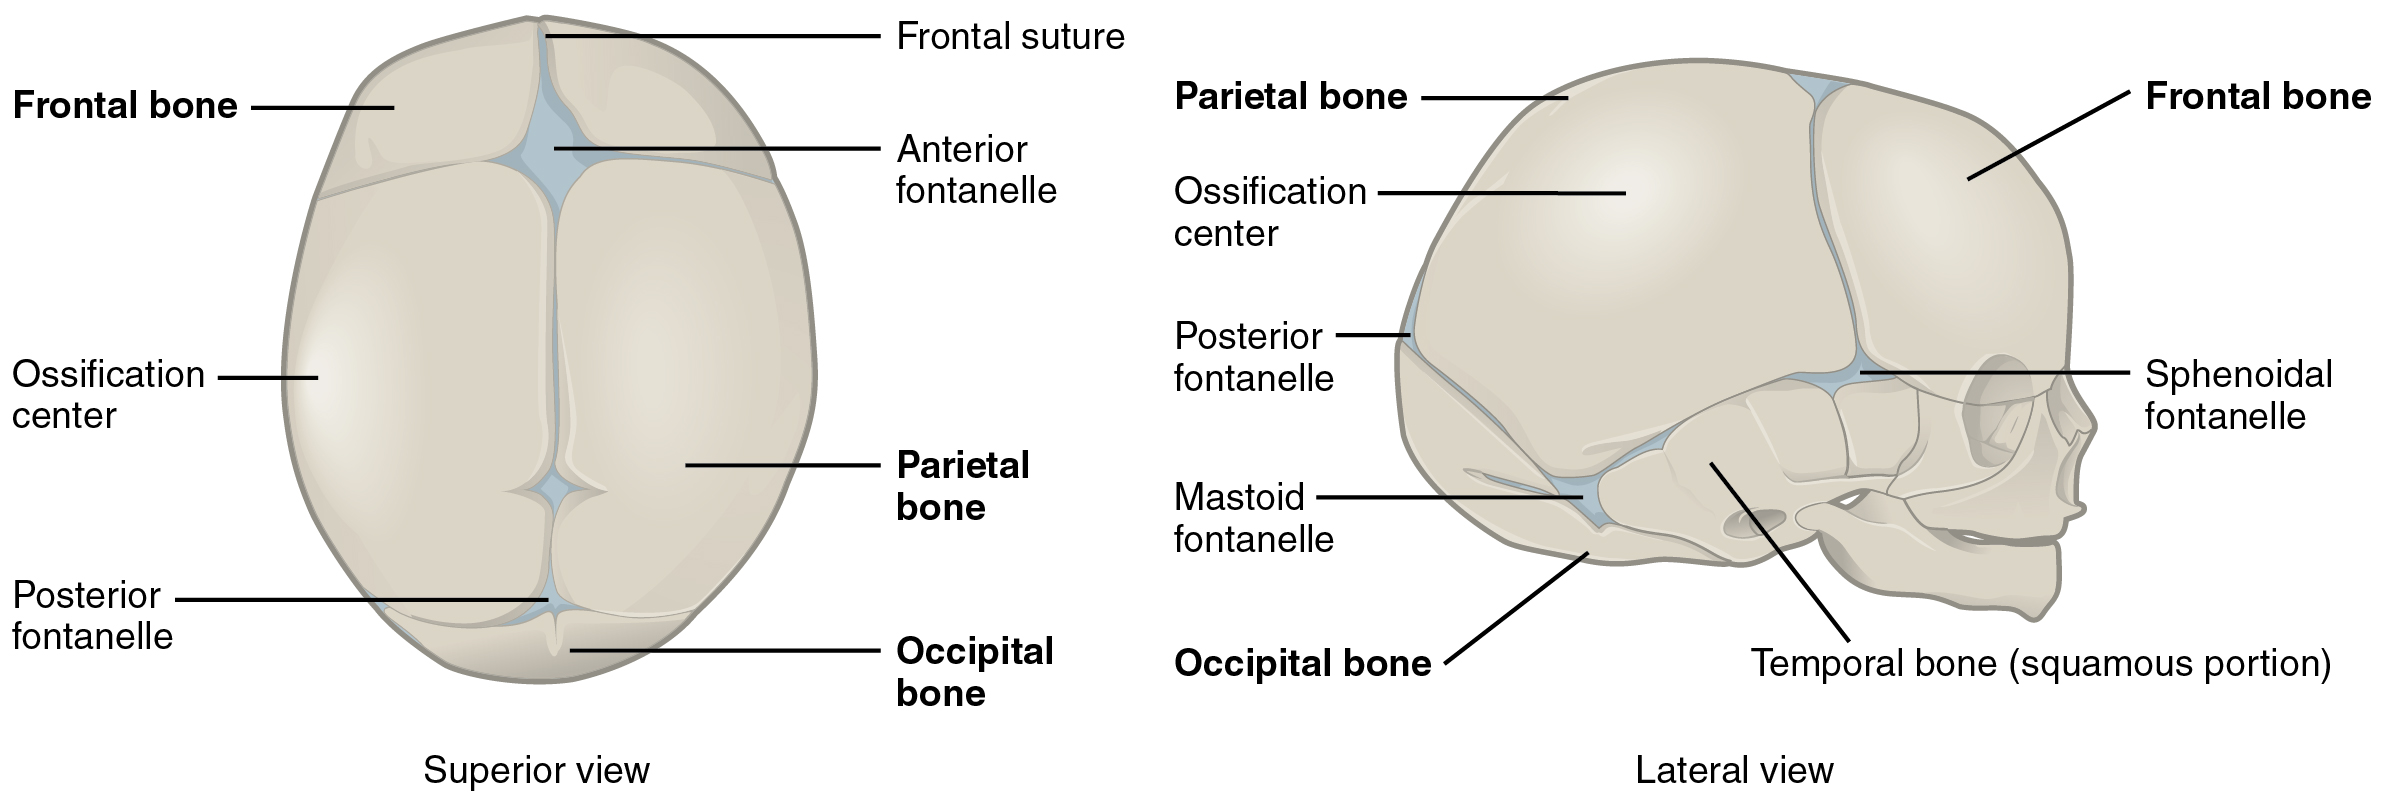 This diagram shows the image of a newborn human skull. The major parts of the skull are labeled. The left panel shows the superior view (from the top) and the right side shows the lateral view (from the side).